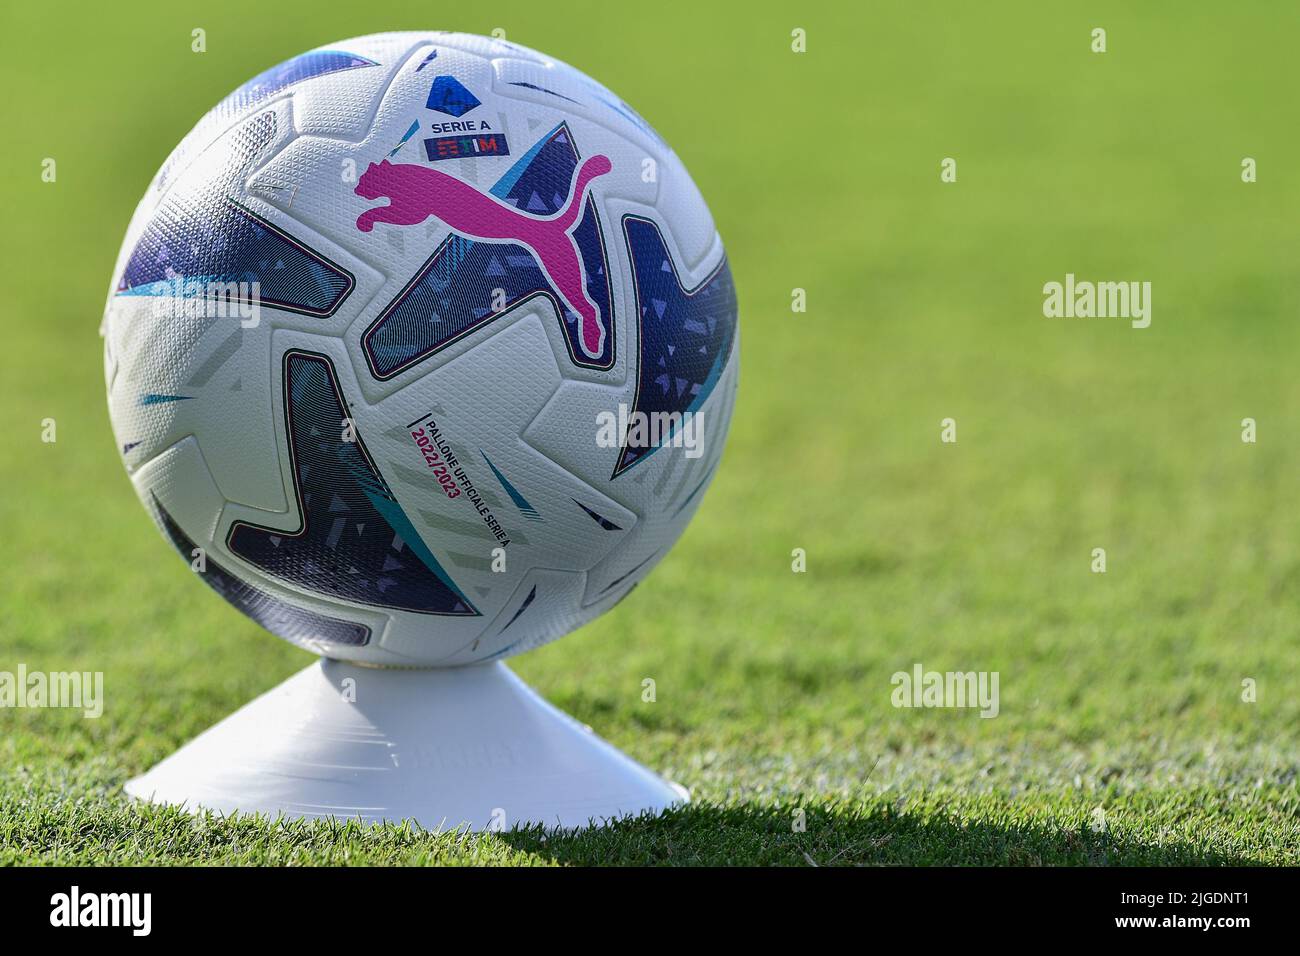 Sussidiario, Empoli, Italy, July 09, 2022, Official ball Puma Serie A 2022/ 2023 during First training session of Empoli FC - Other Stock Photo - Alamy